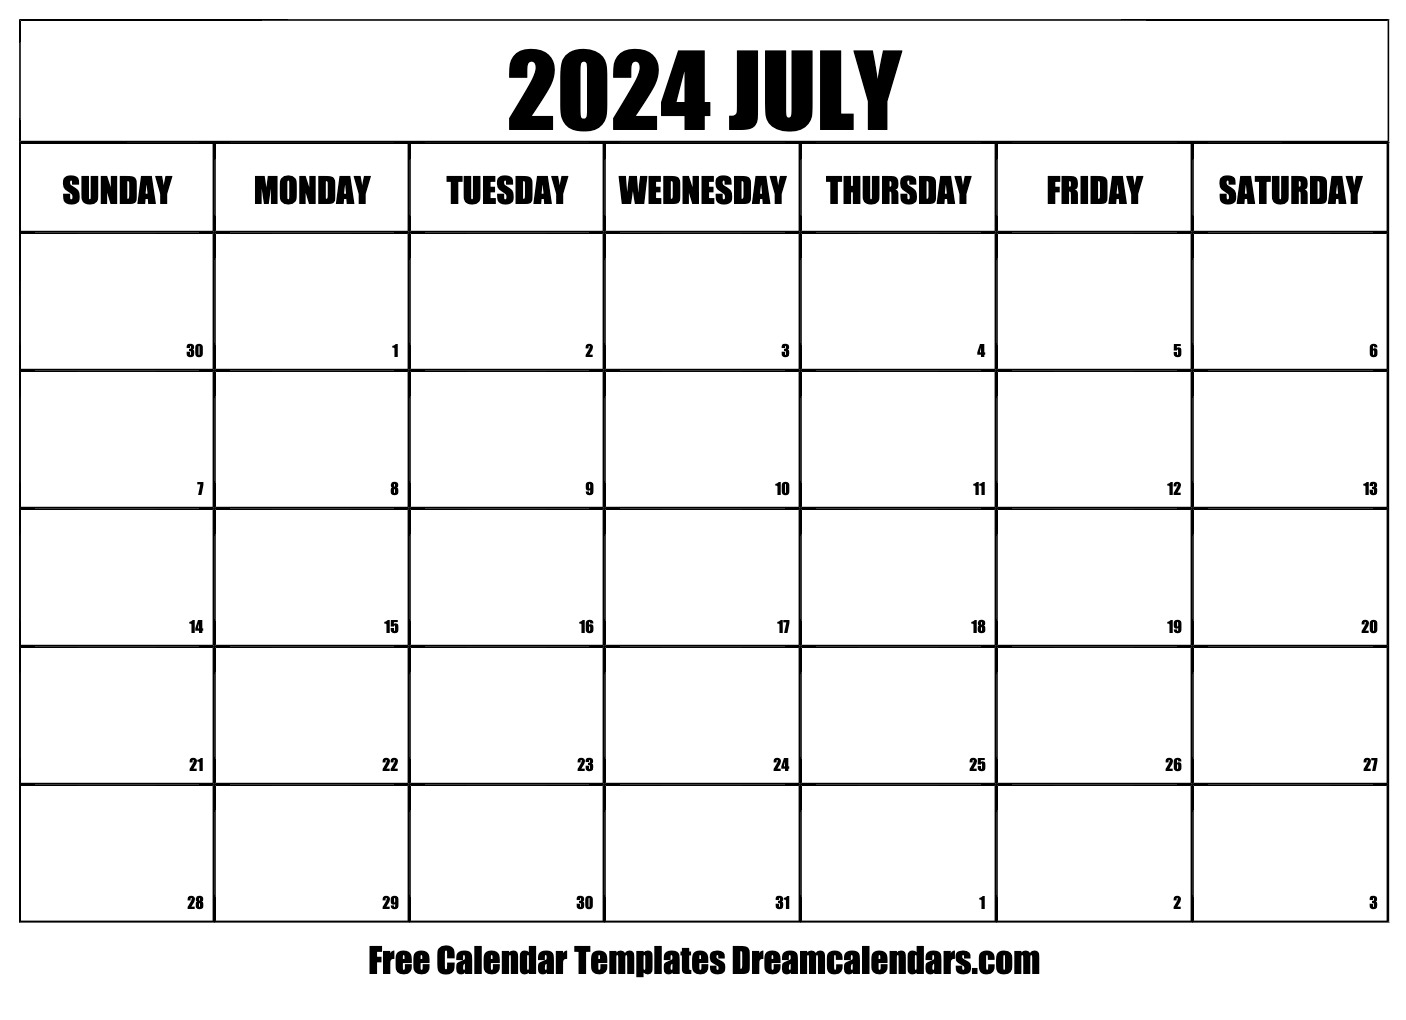 July 2024 Calendar | Free Blank Printable With Holidays for July 2024 Calendar Free Printable